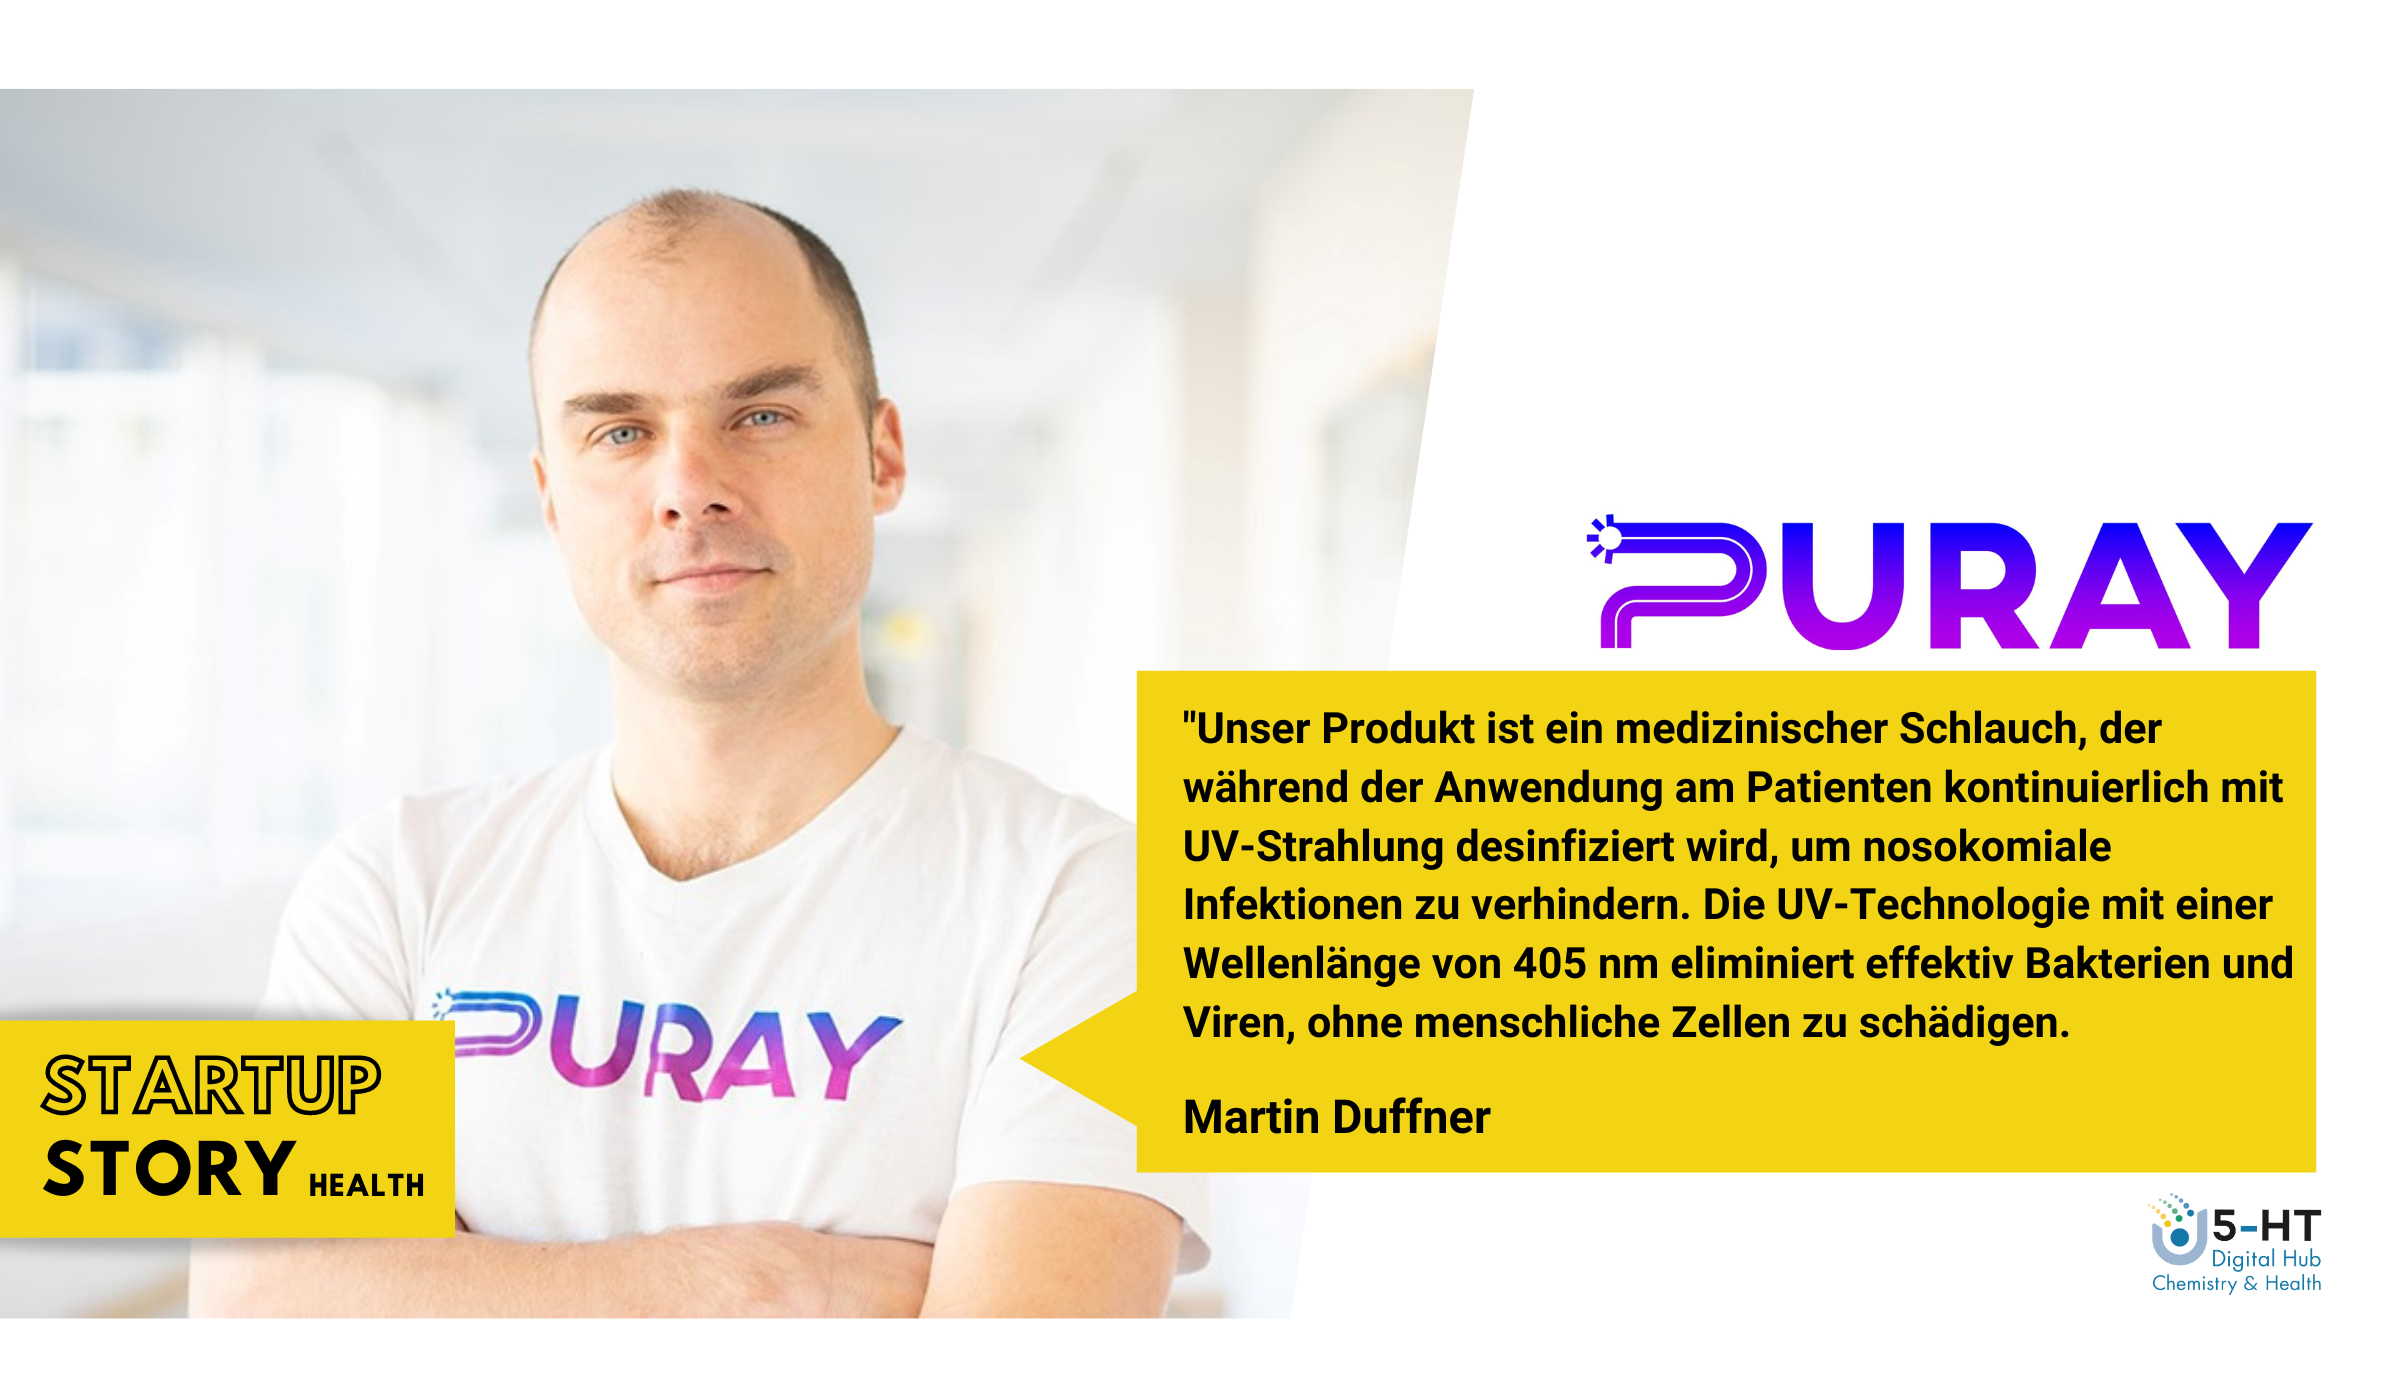 Pioneers in infection prevention: Puray revolutionises the healthcare sector with UV-disinfected catheters